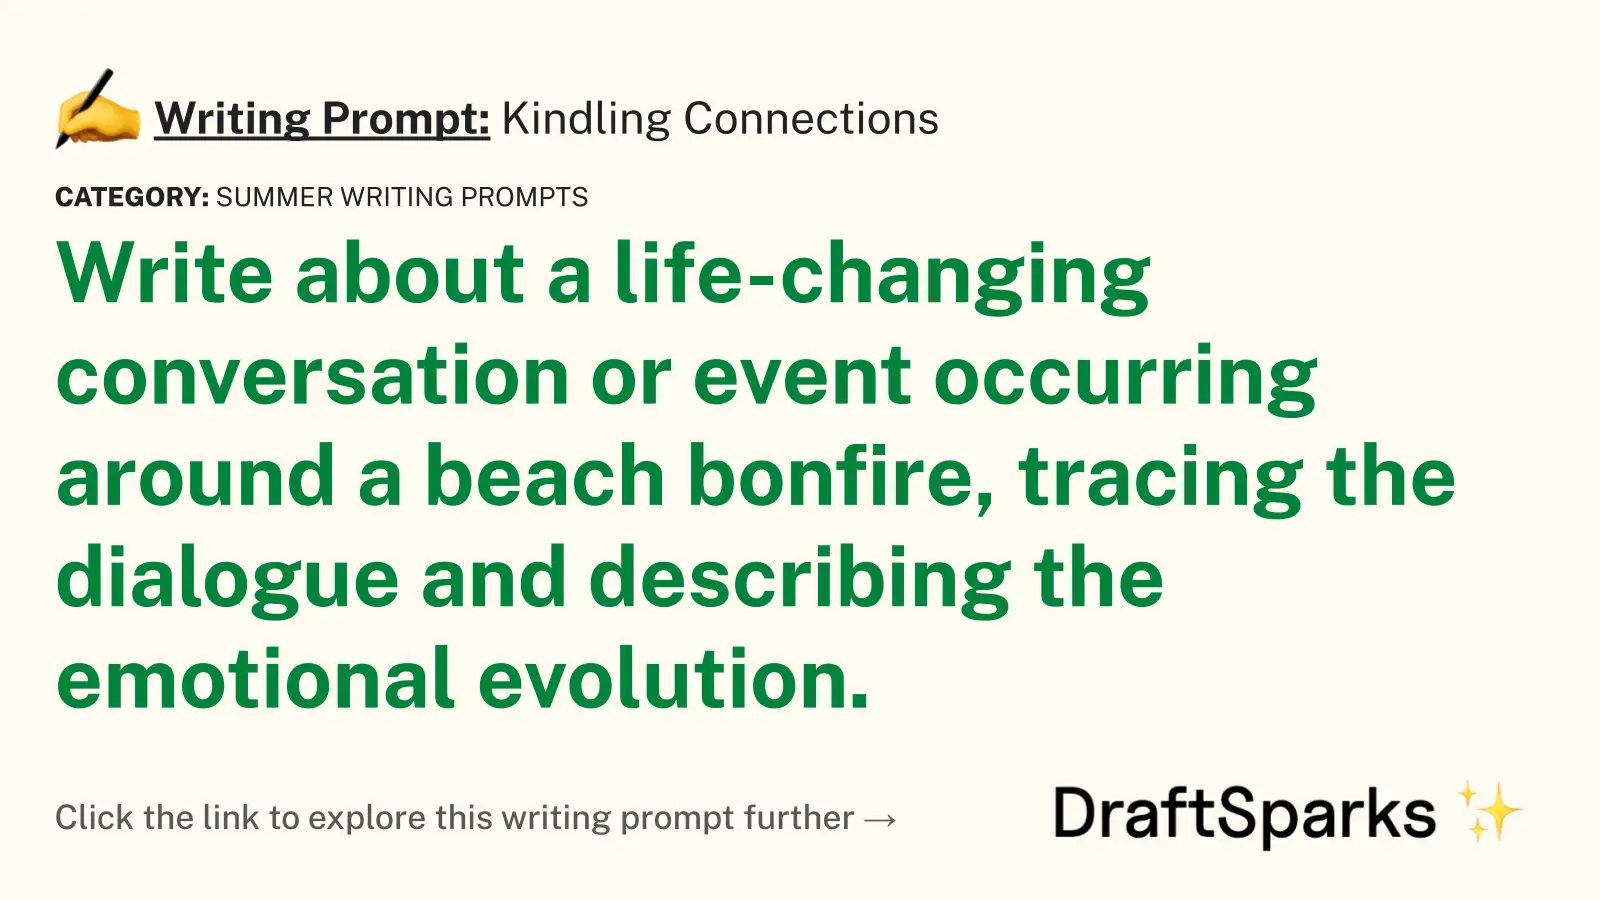 Kindling Connections